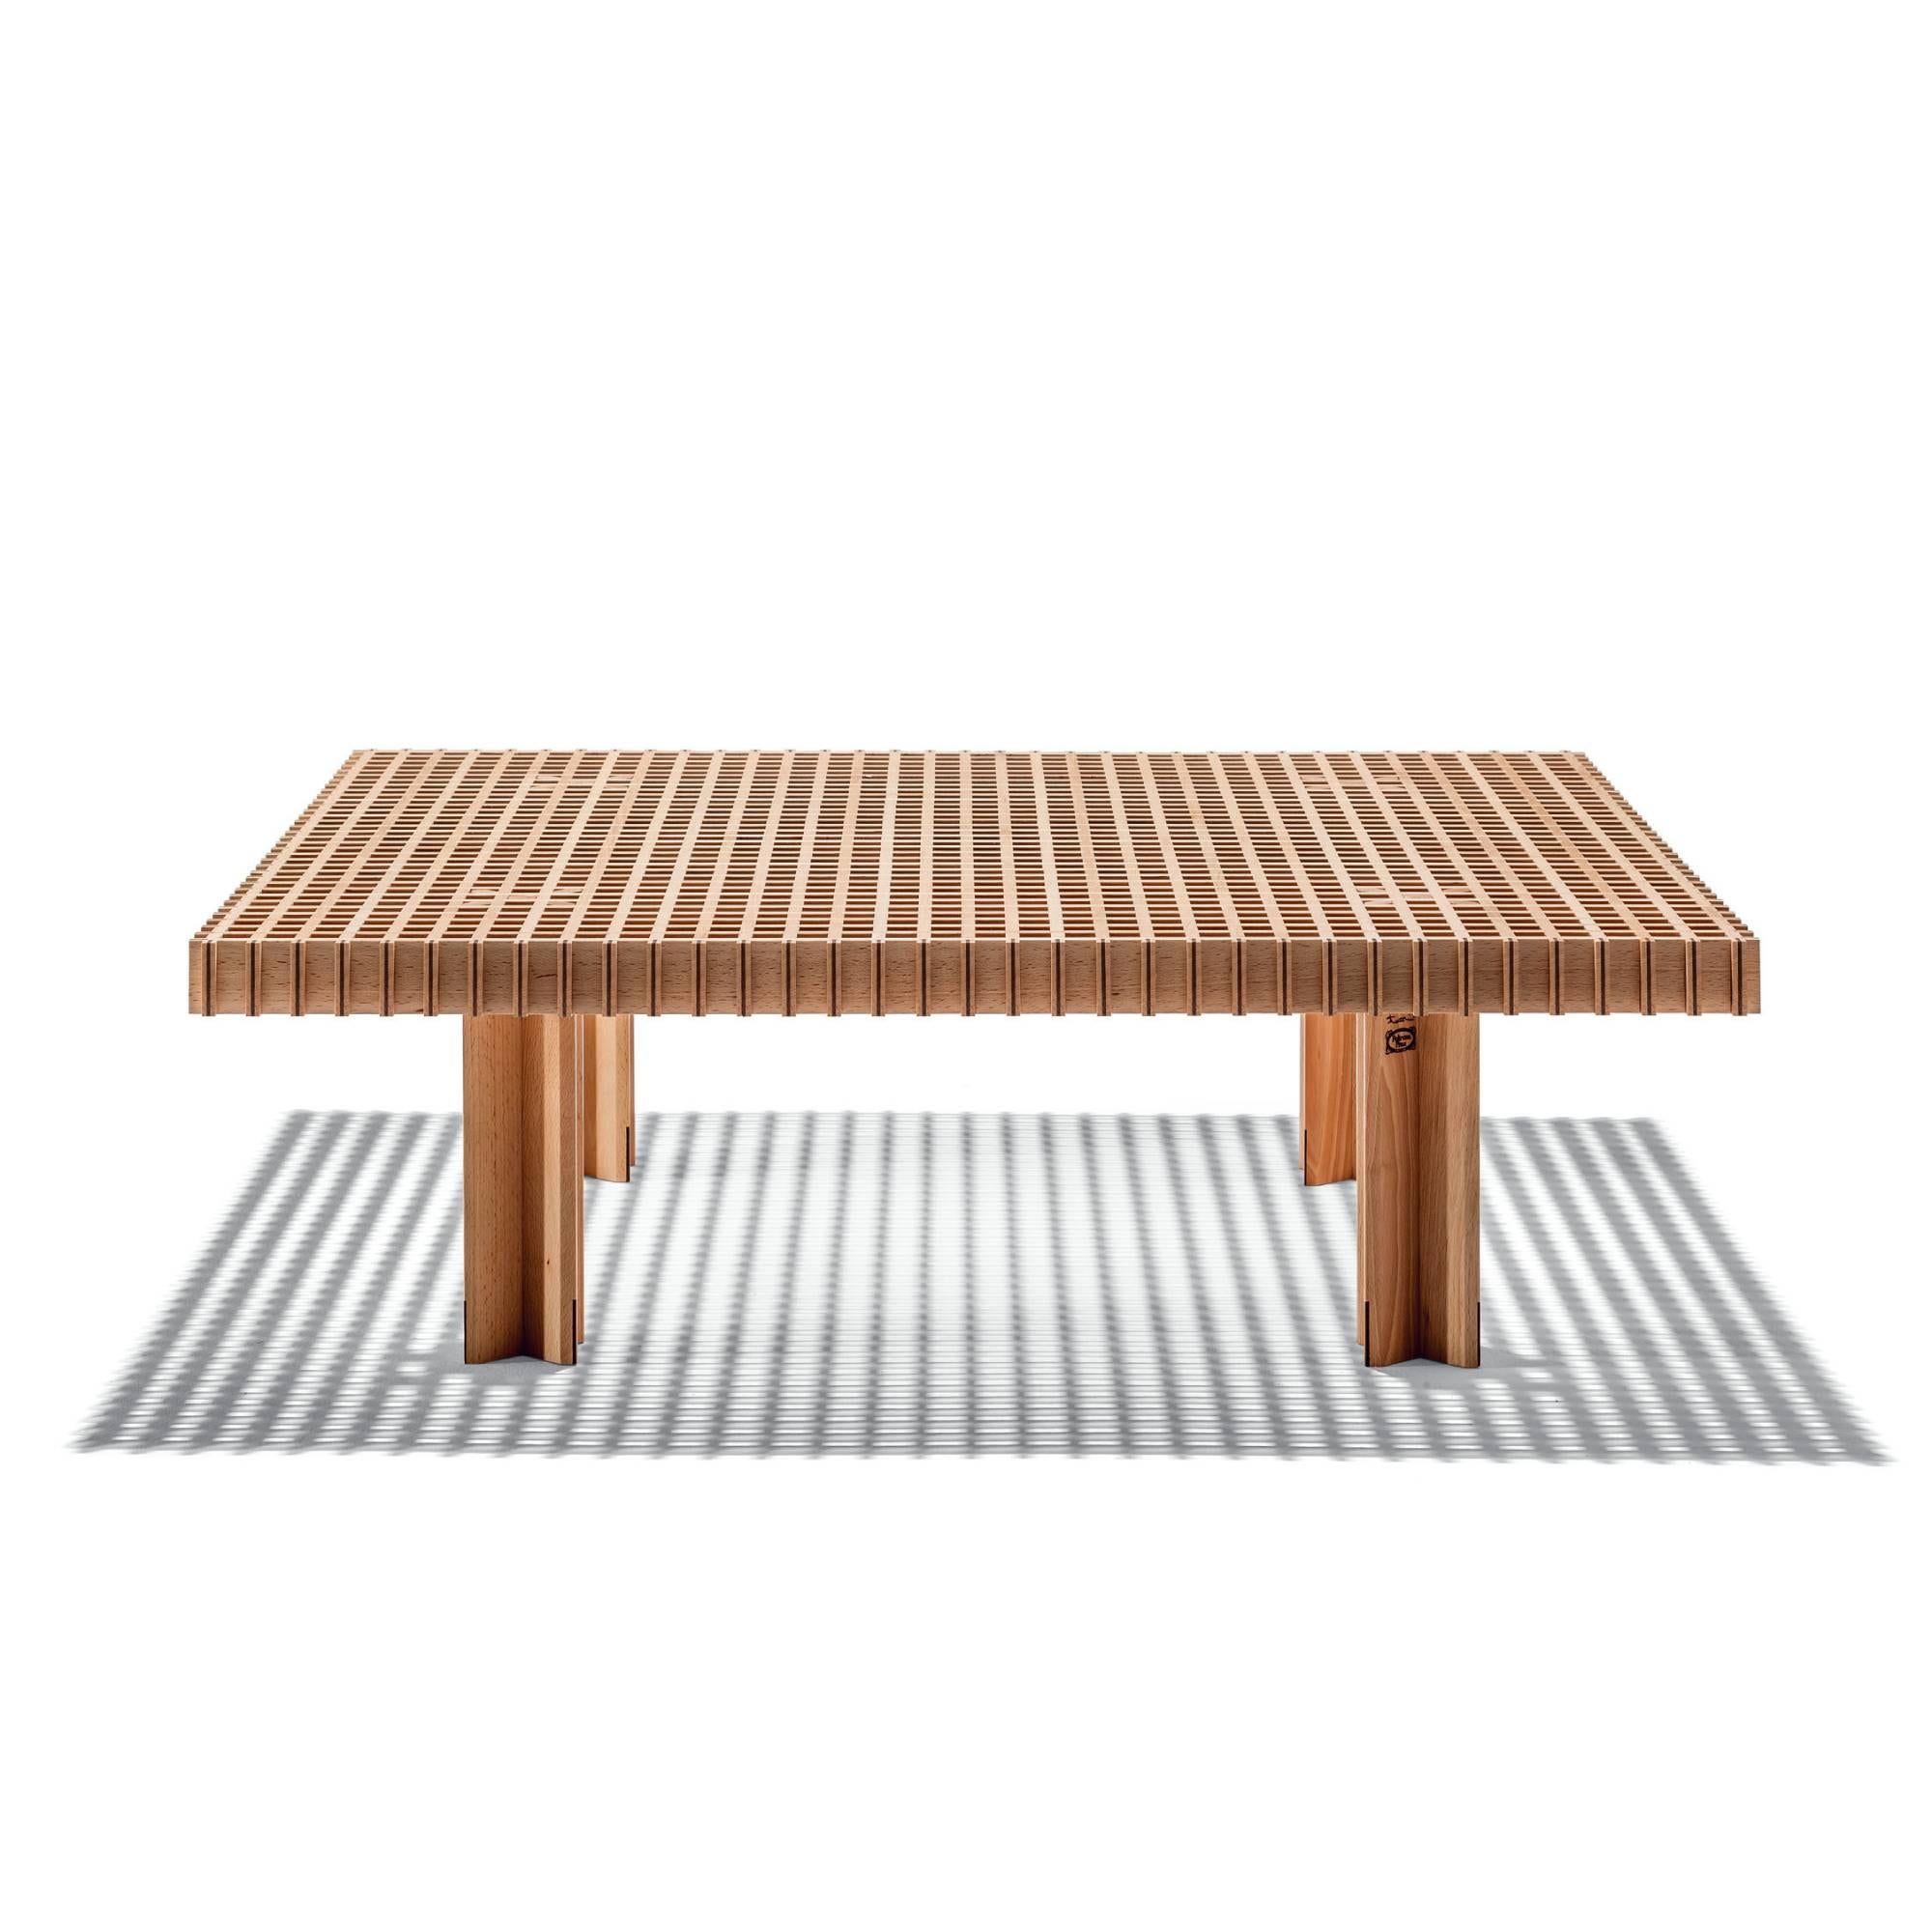 Italian Kyoto Solid Wood Square Coffee Table Natural Beech Finish